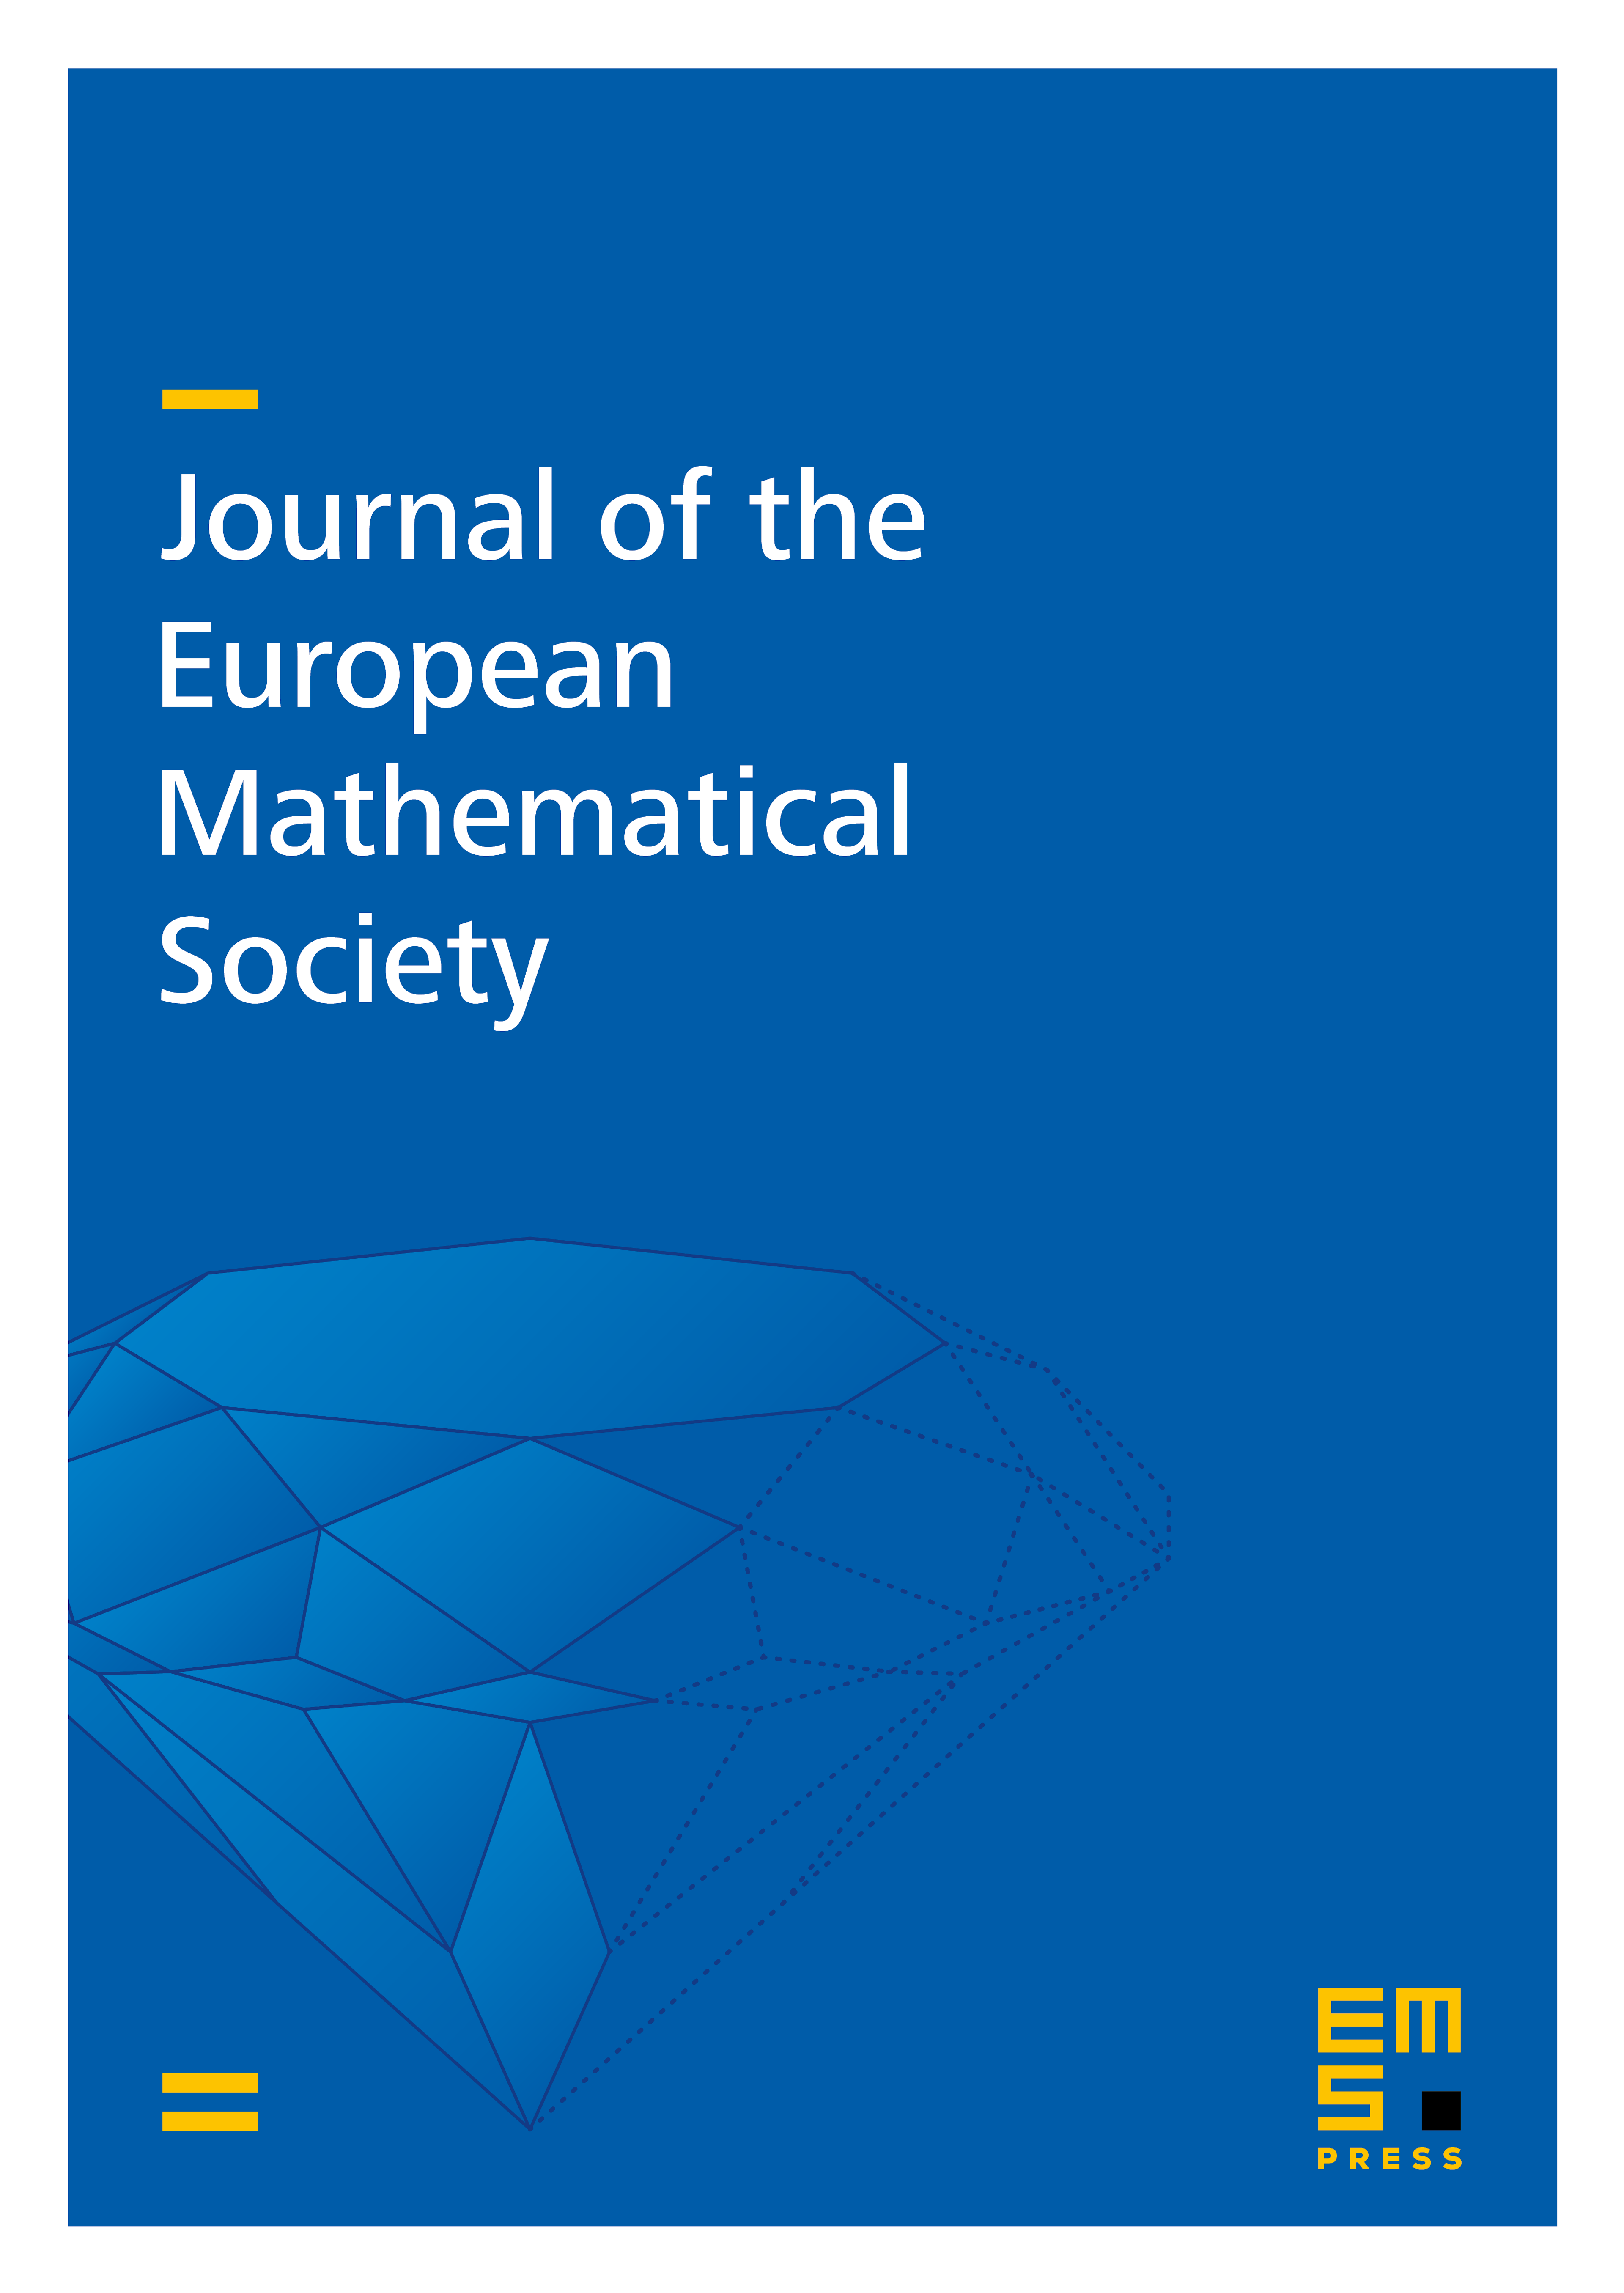 Orbit equivalence and Borel reducibility rigidity for profinite actions with spectral gap cover